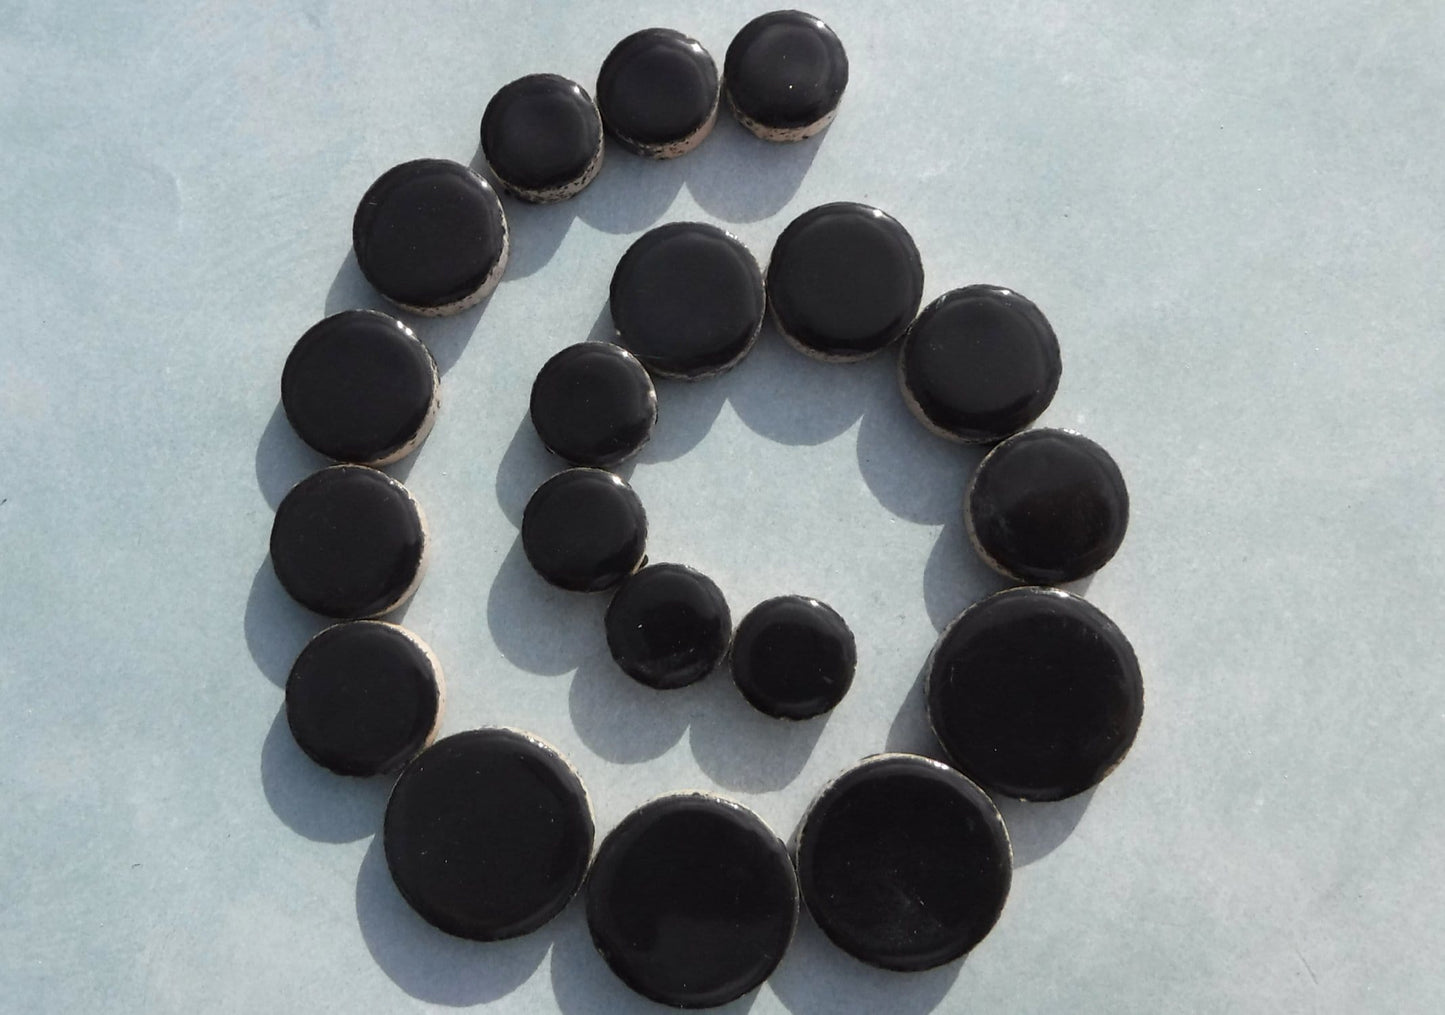 Black Circles Mosaic Tiles - 50g Ceramic in Mix of 3 Sizes 1/2" and 3/4" and 5/8"